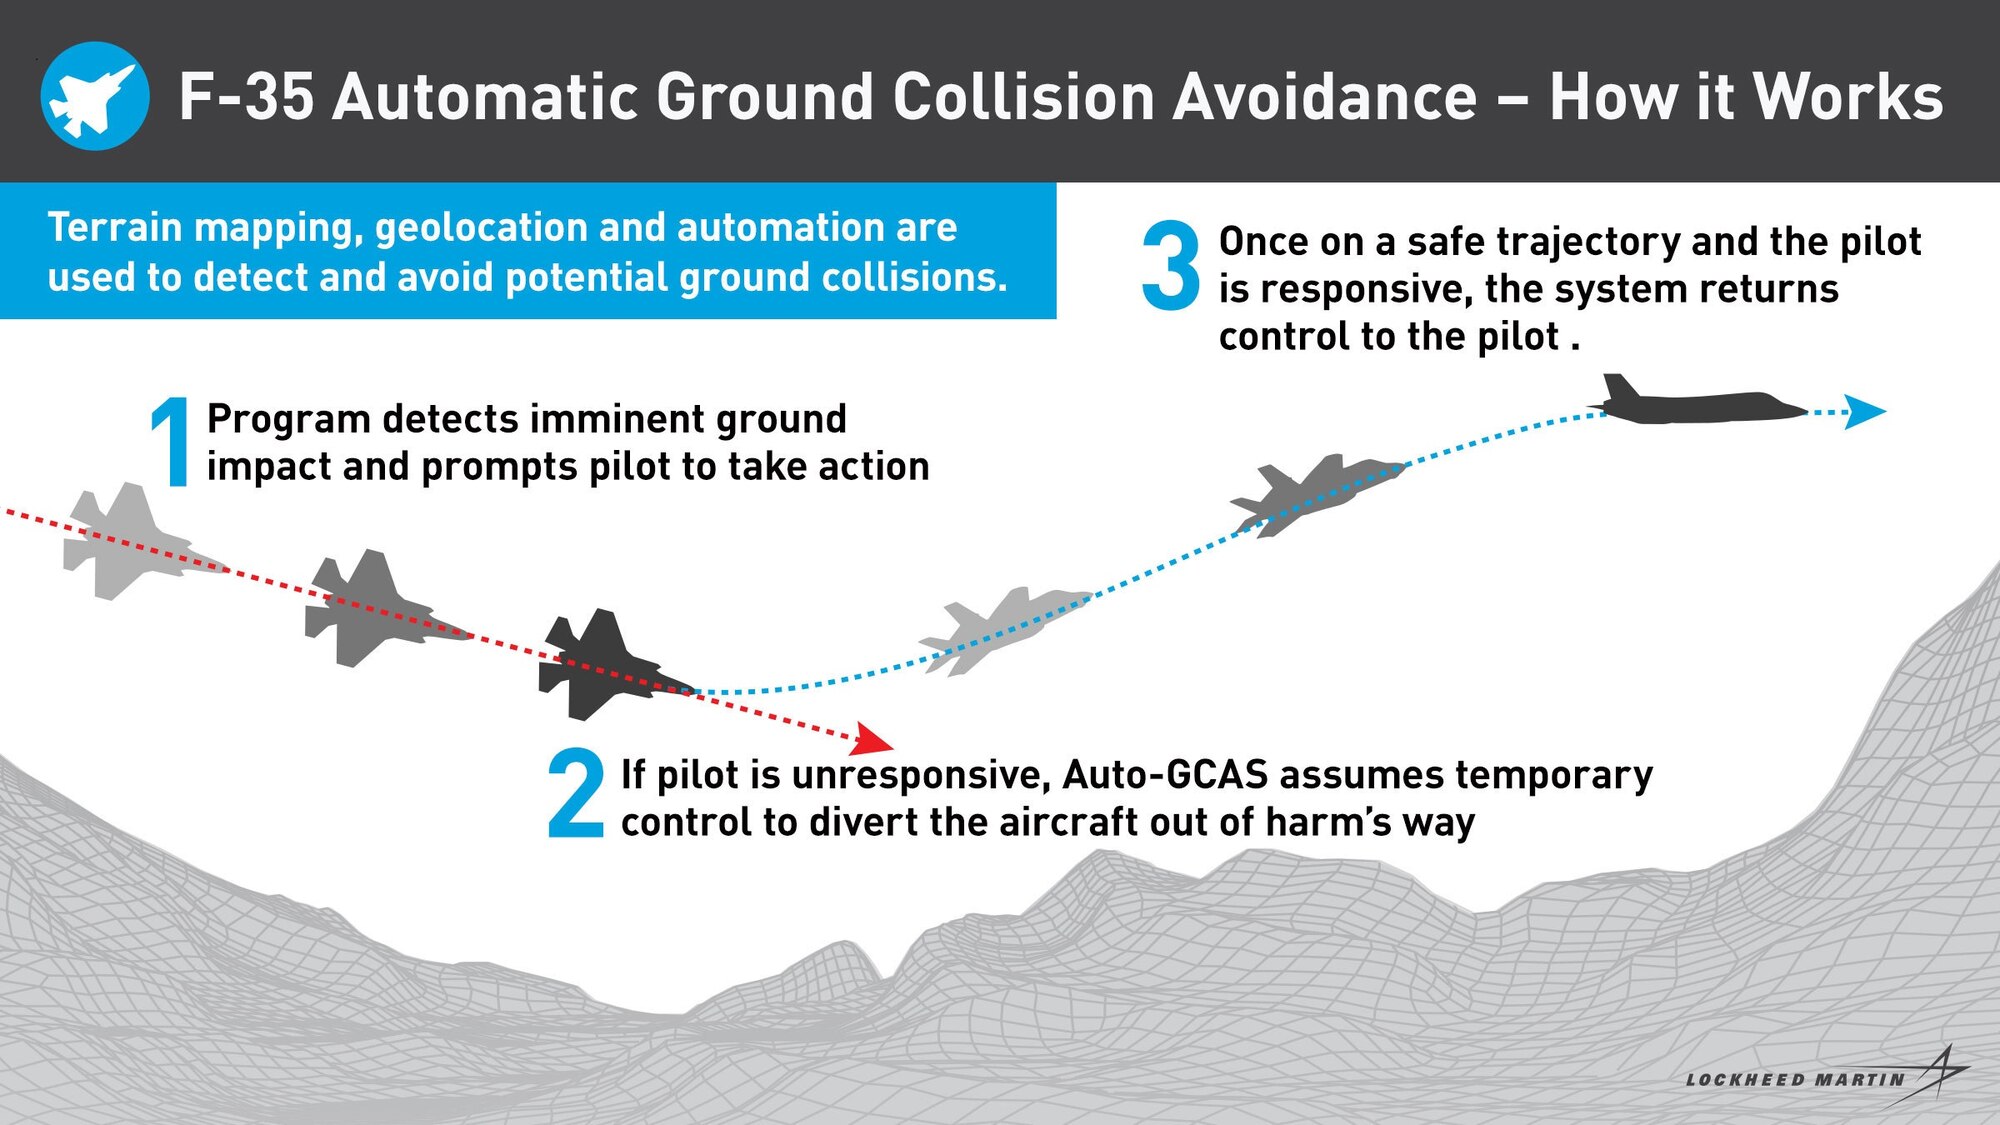 Auto-GCAS uses terrain mapping, geolocation and automation to detect and avoid potential ground collisions.